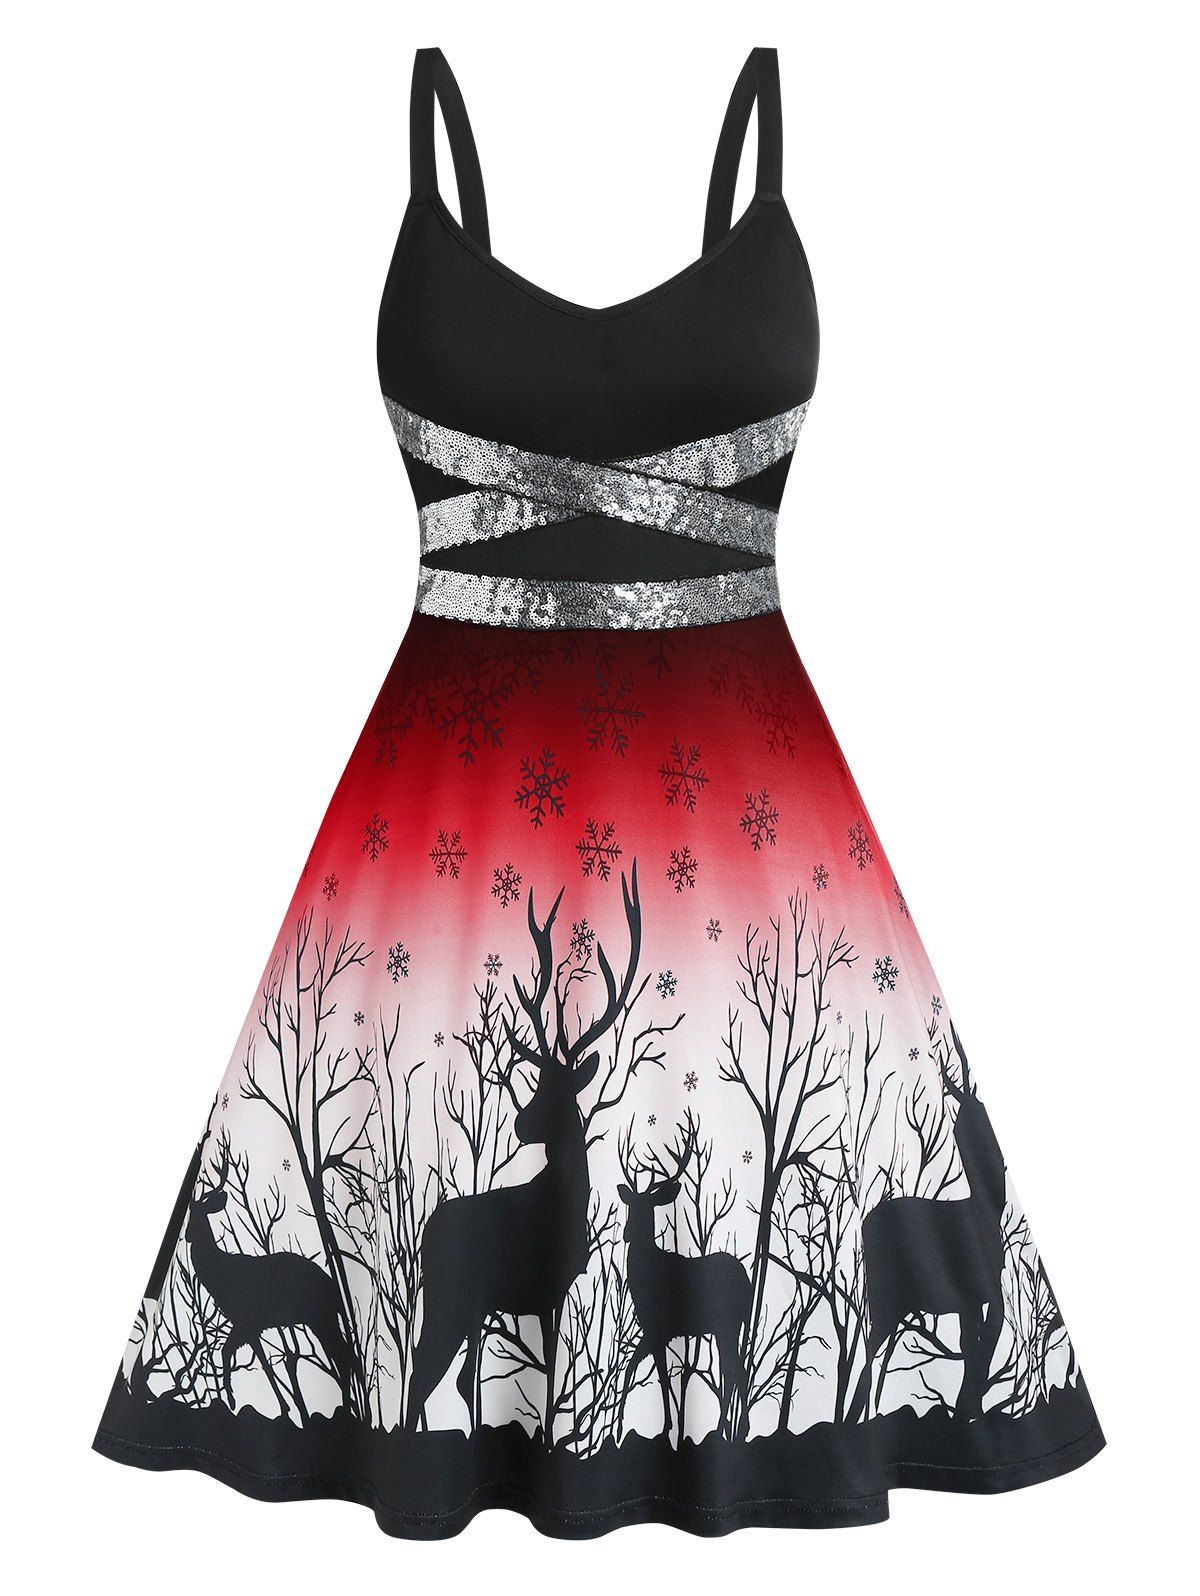 Christmas Party Dress Snowflake Elk Print Sequined Dress - RED XL